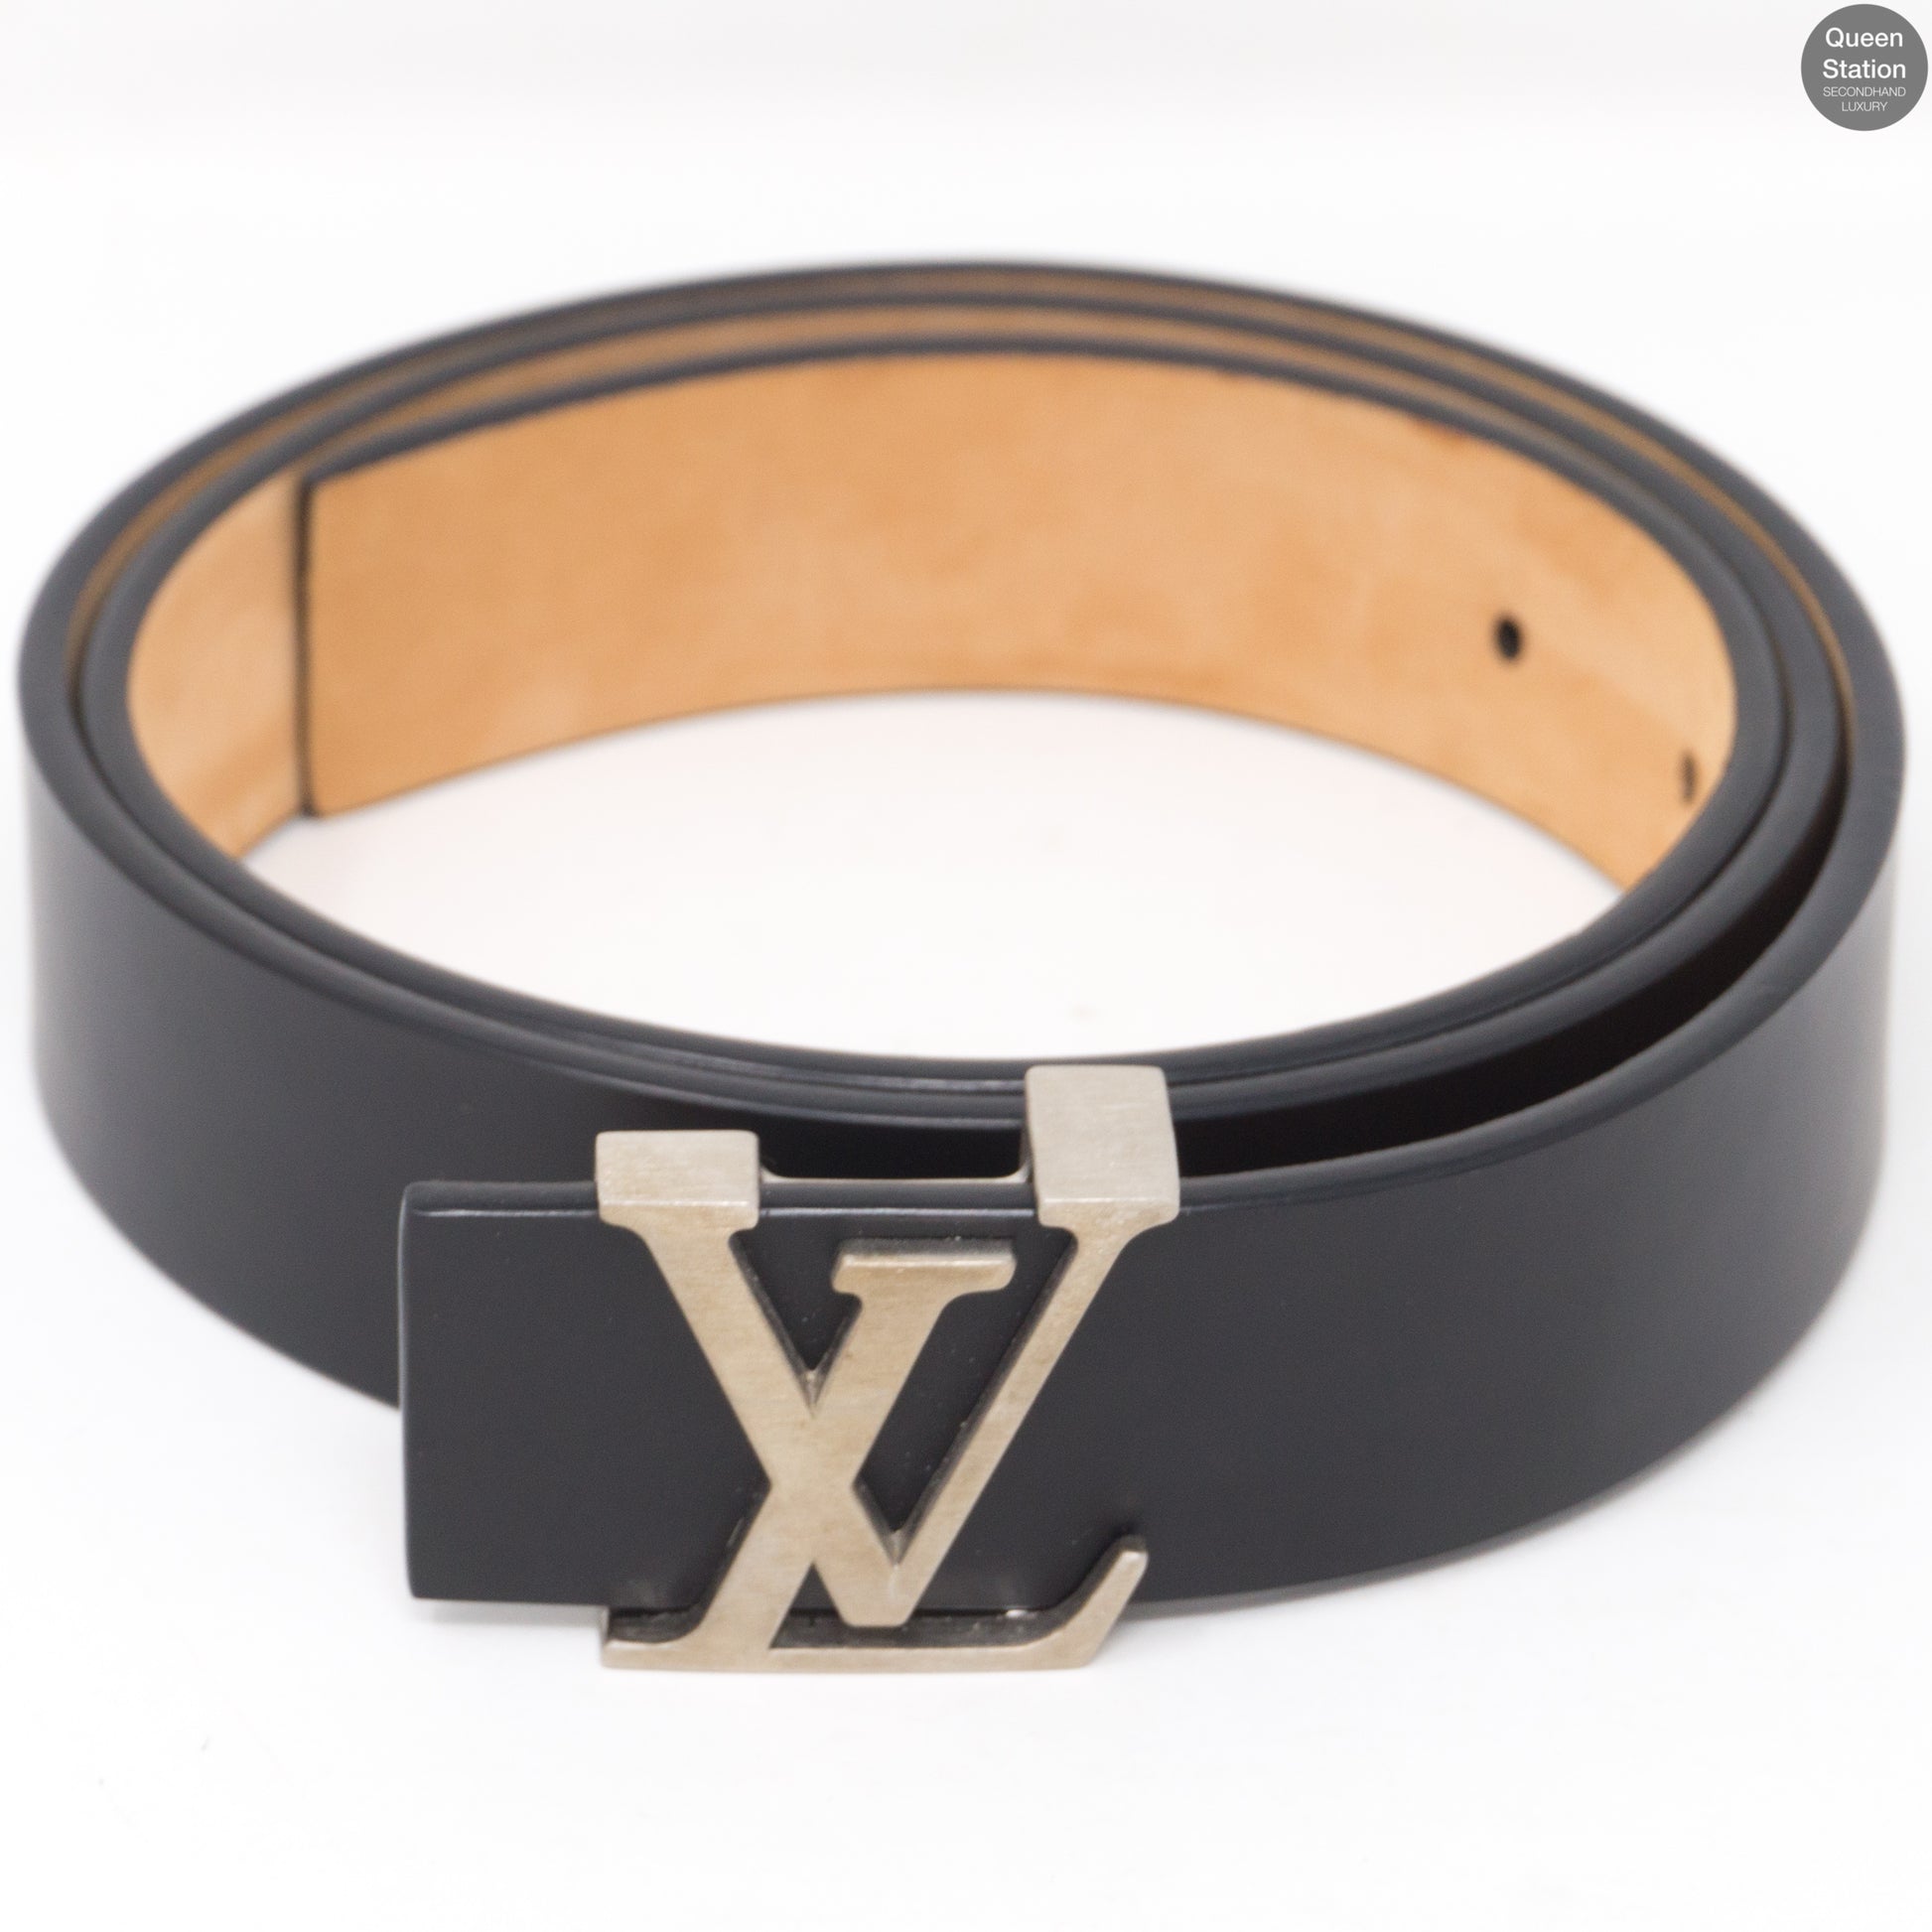 Initiales leather belt Louis Vuitton Black size 85 cm in Leather - 34843287